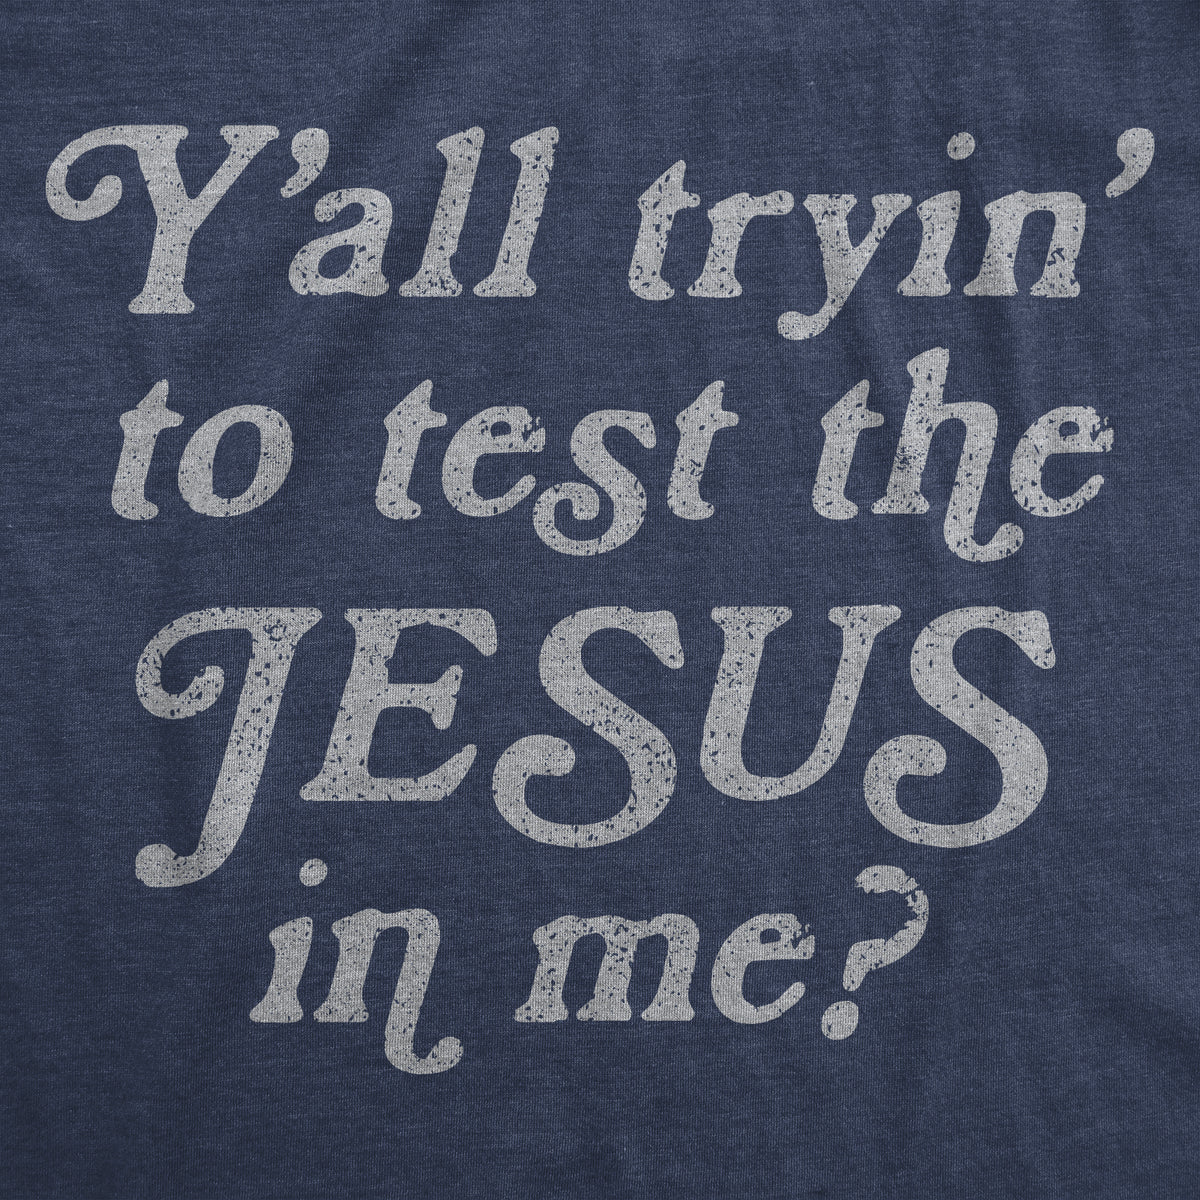 Y&#39;all Tryin&#39; To Test The Jesus In Me Women&#39;s T Shirt